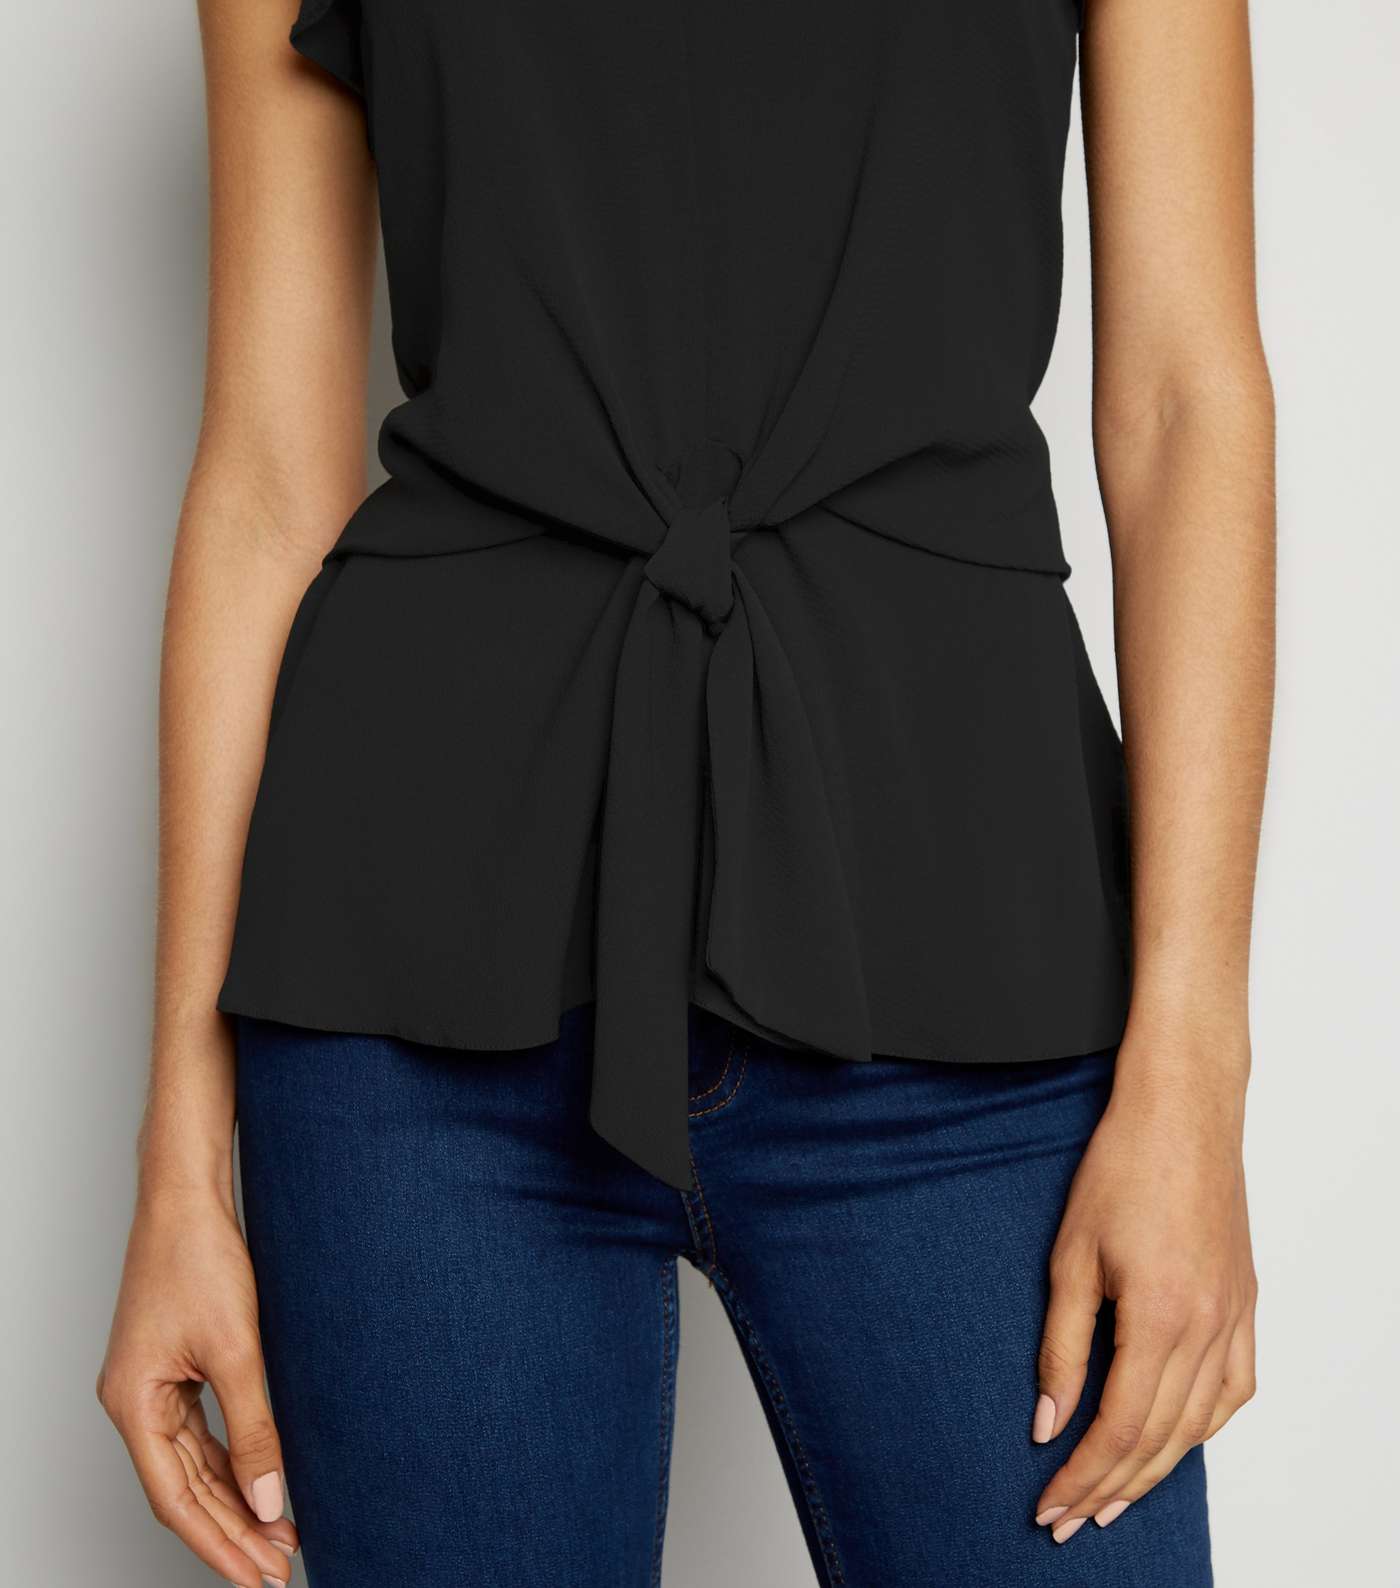 Black Frill Tie Front Top Image 5